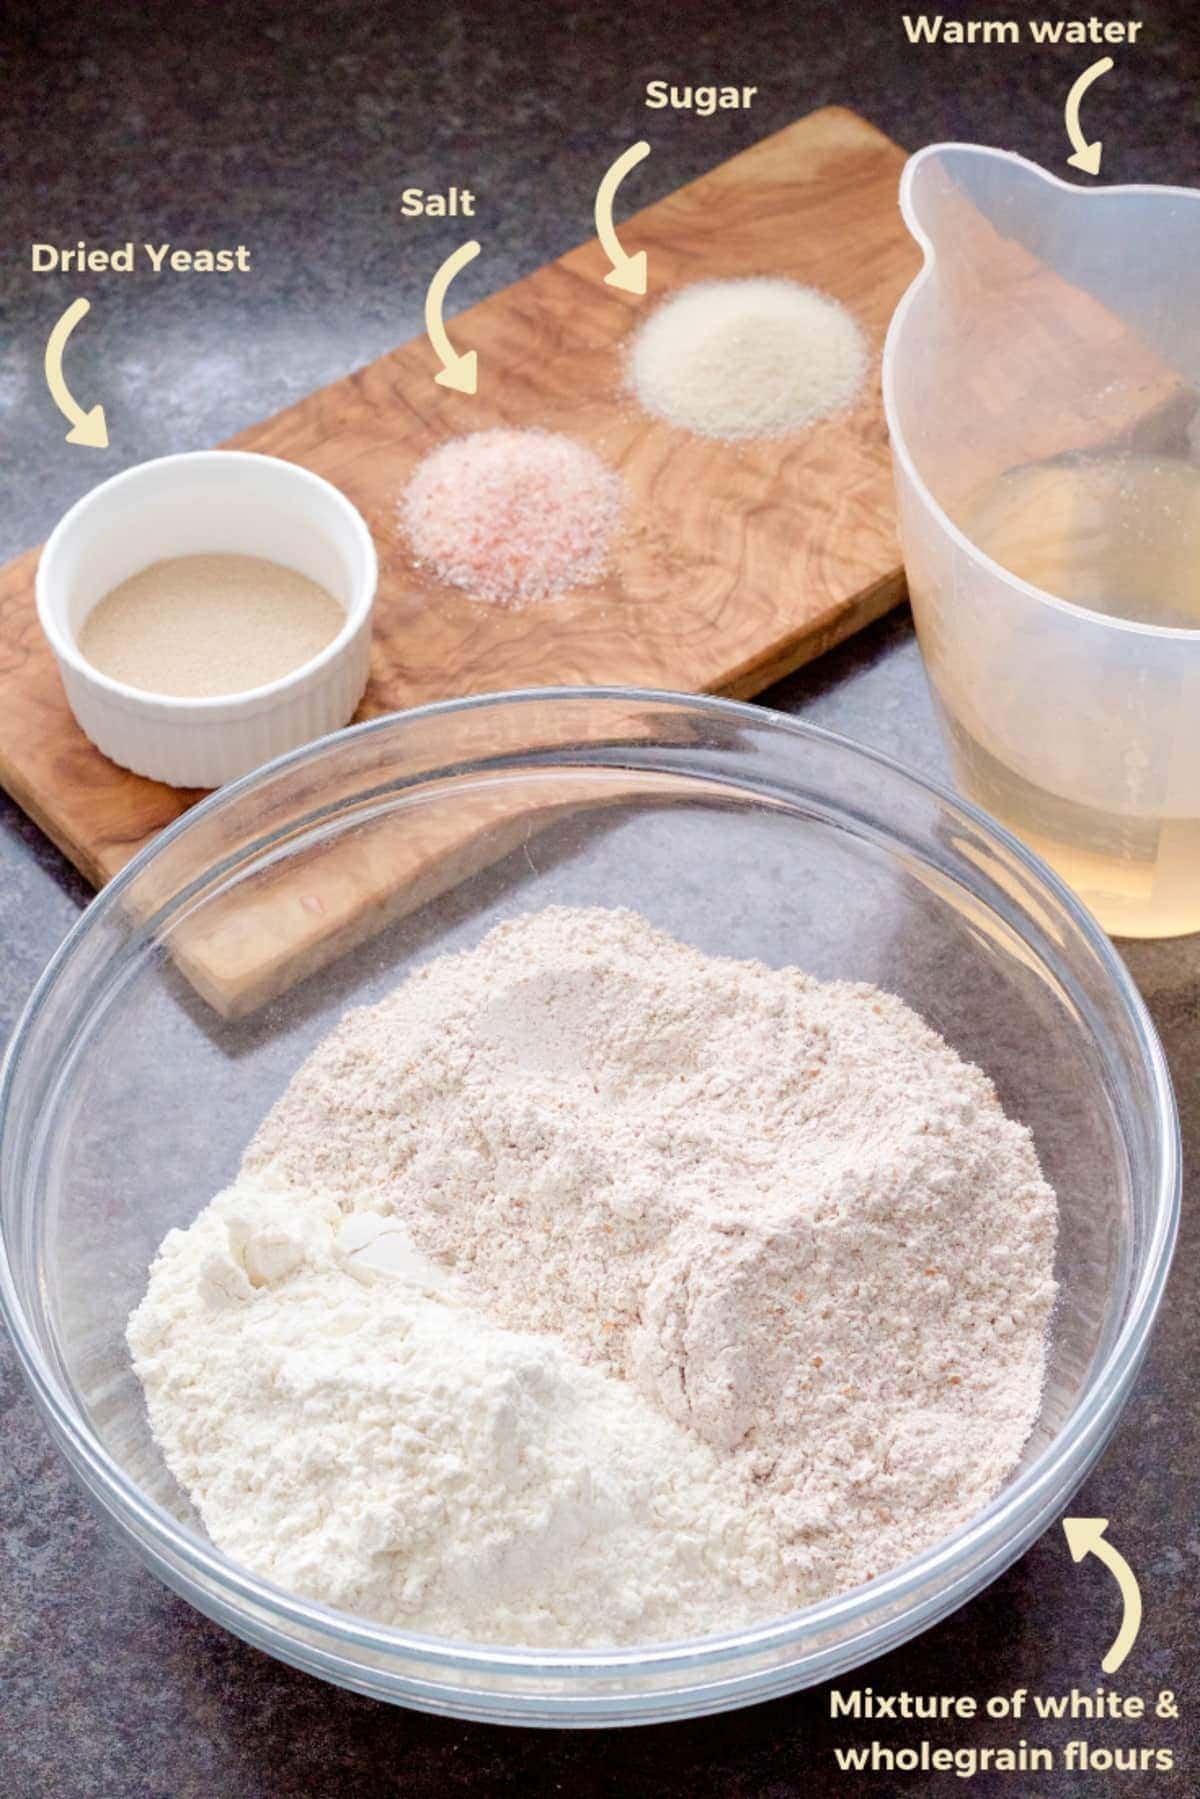 Ingredients for making bread.